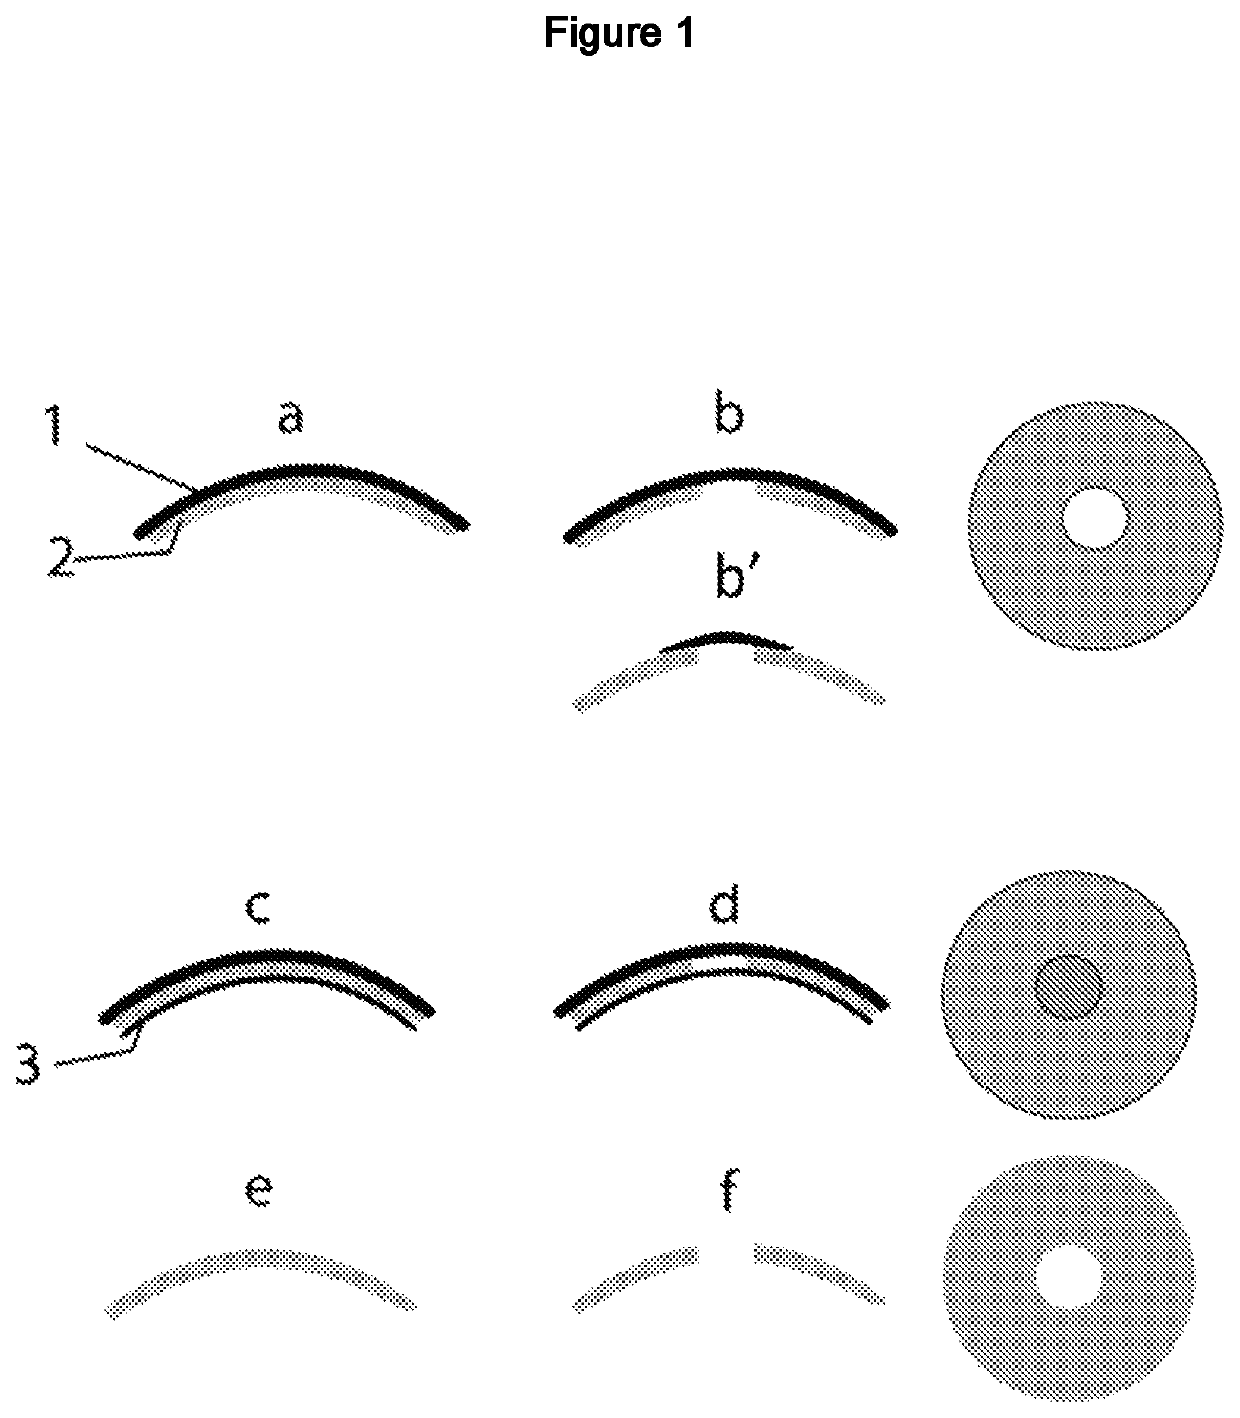 Ophthalmic contact lens with compressible affinity matrix